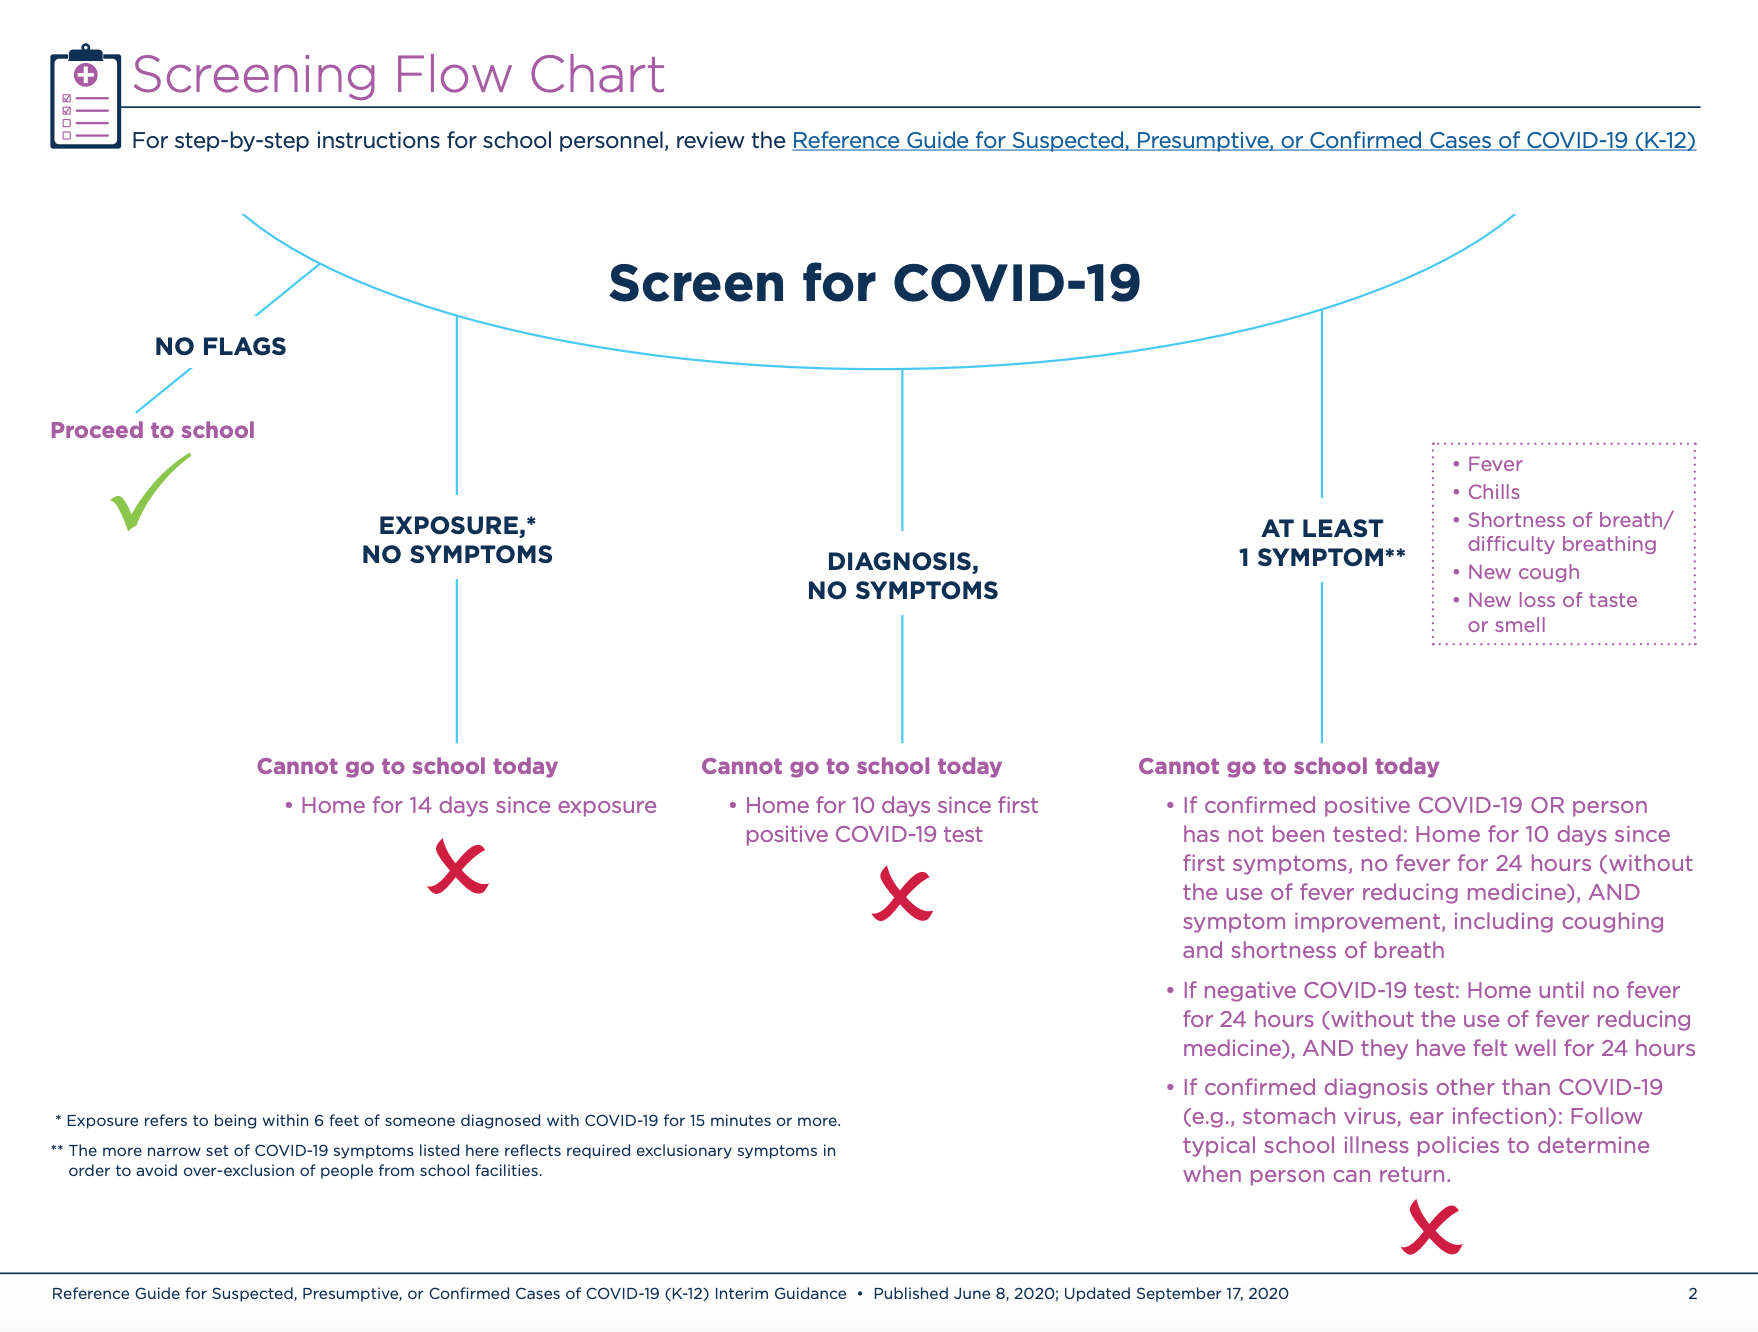 Screening for COVID